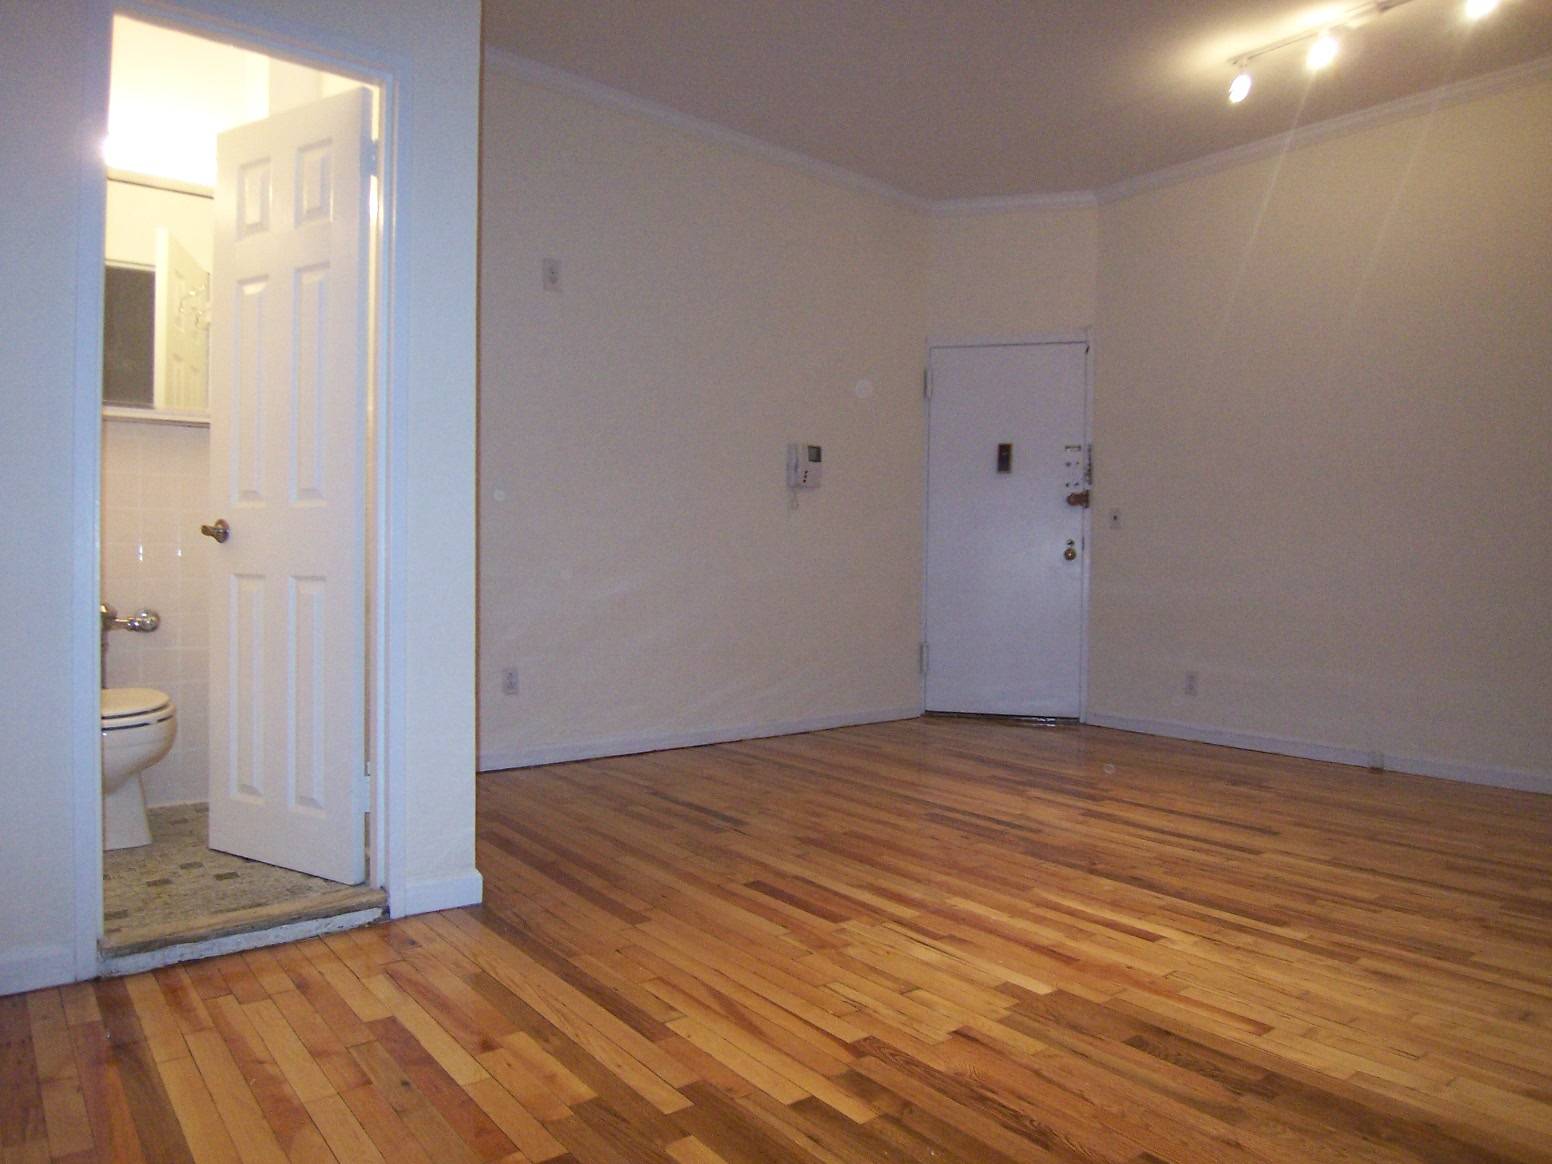 Spacious Studio Apartment With Terrace And Separate Eat-In-Kitchen on Upper West Side!